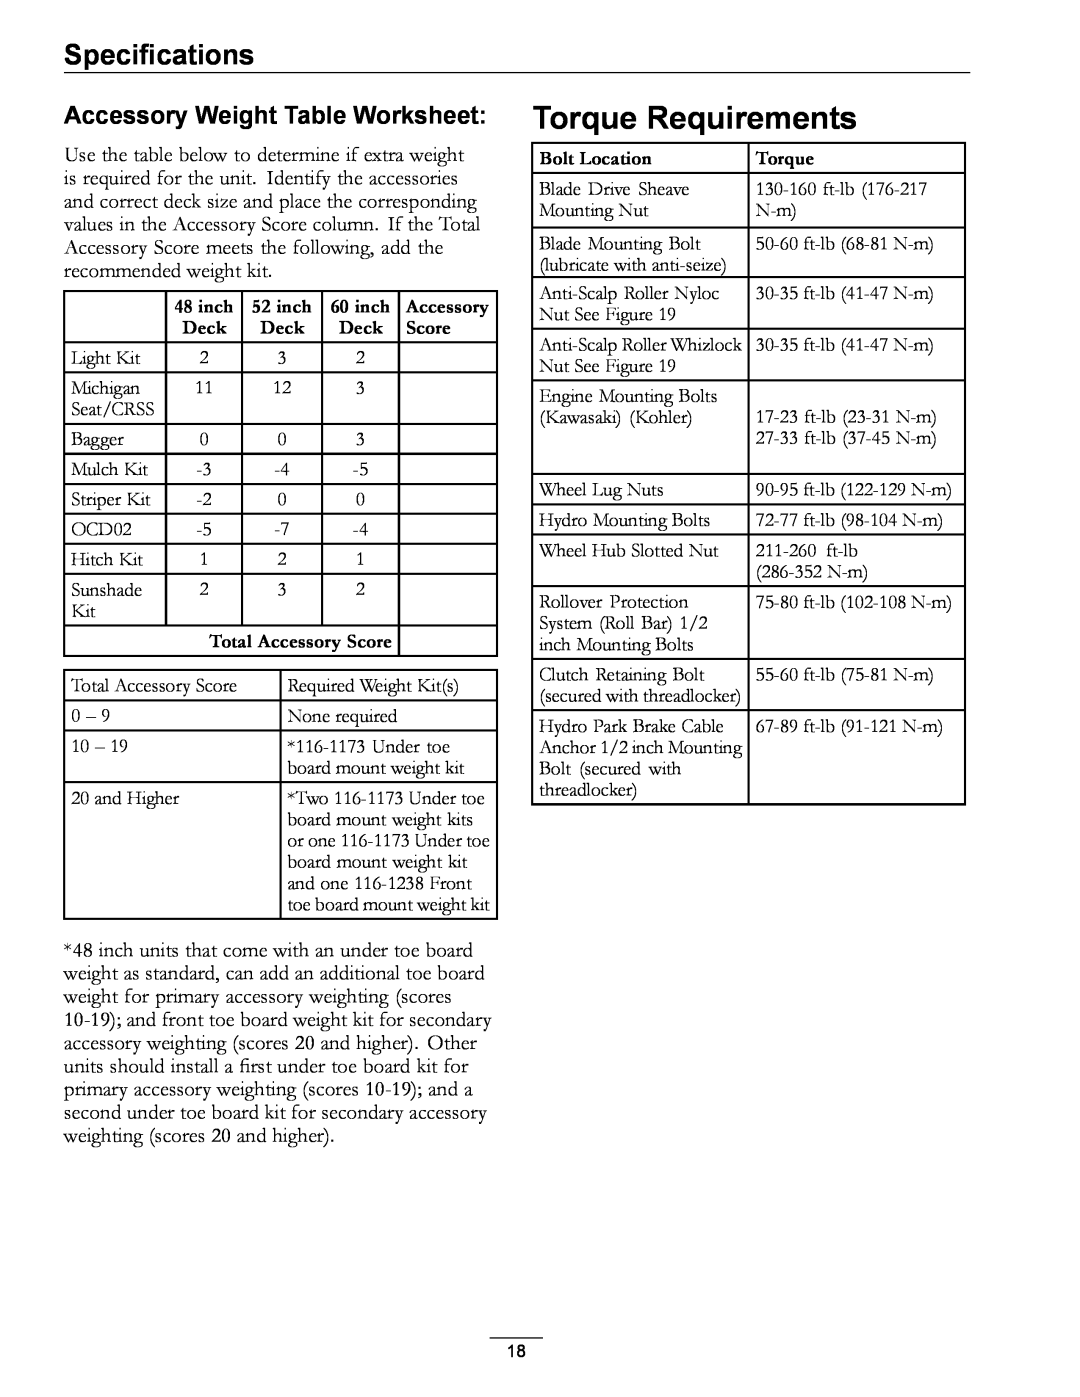 Exmark 4500-872 manual Torque Requirements, Accessory Weight Table Worksheet, Specifications 